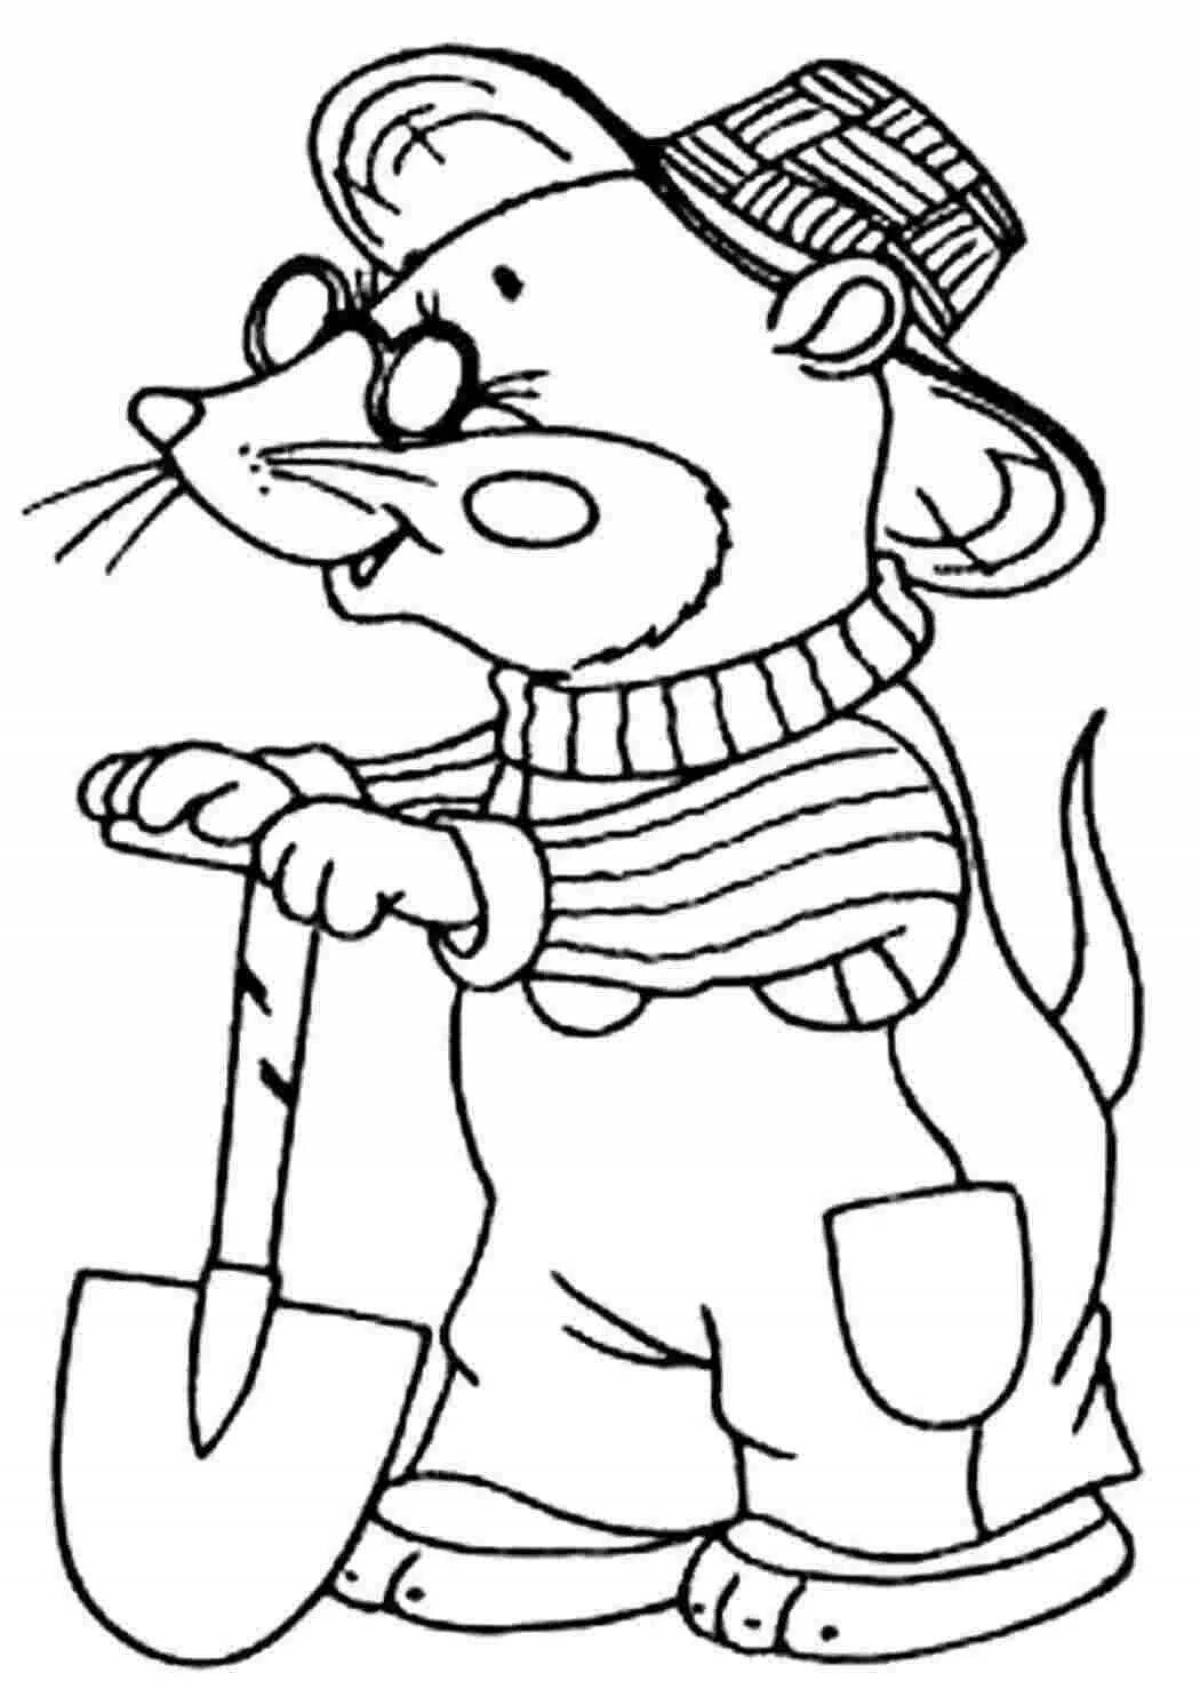 Adorable mole coloring page for kids